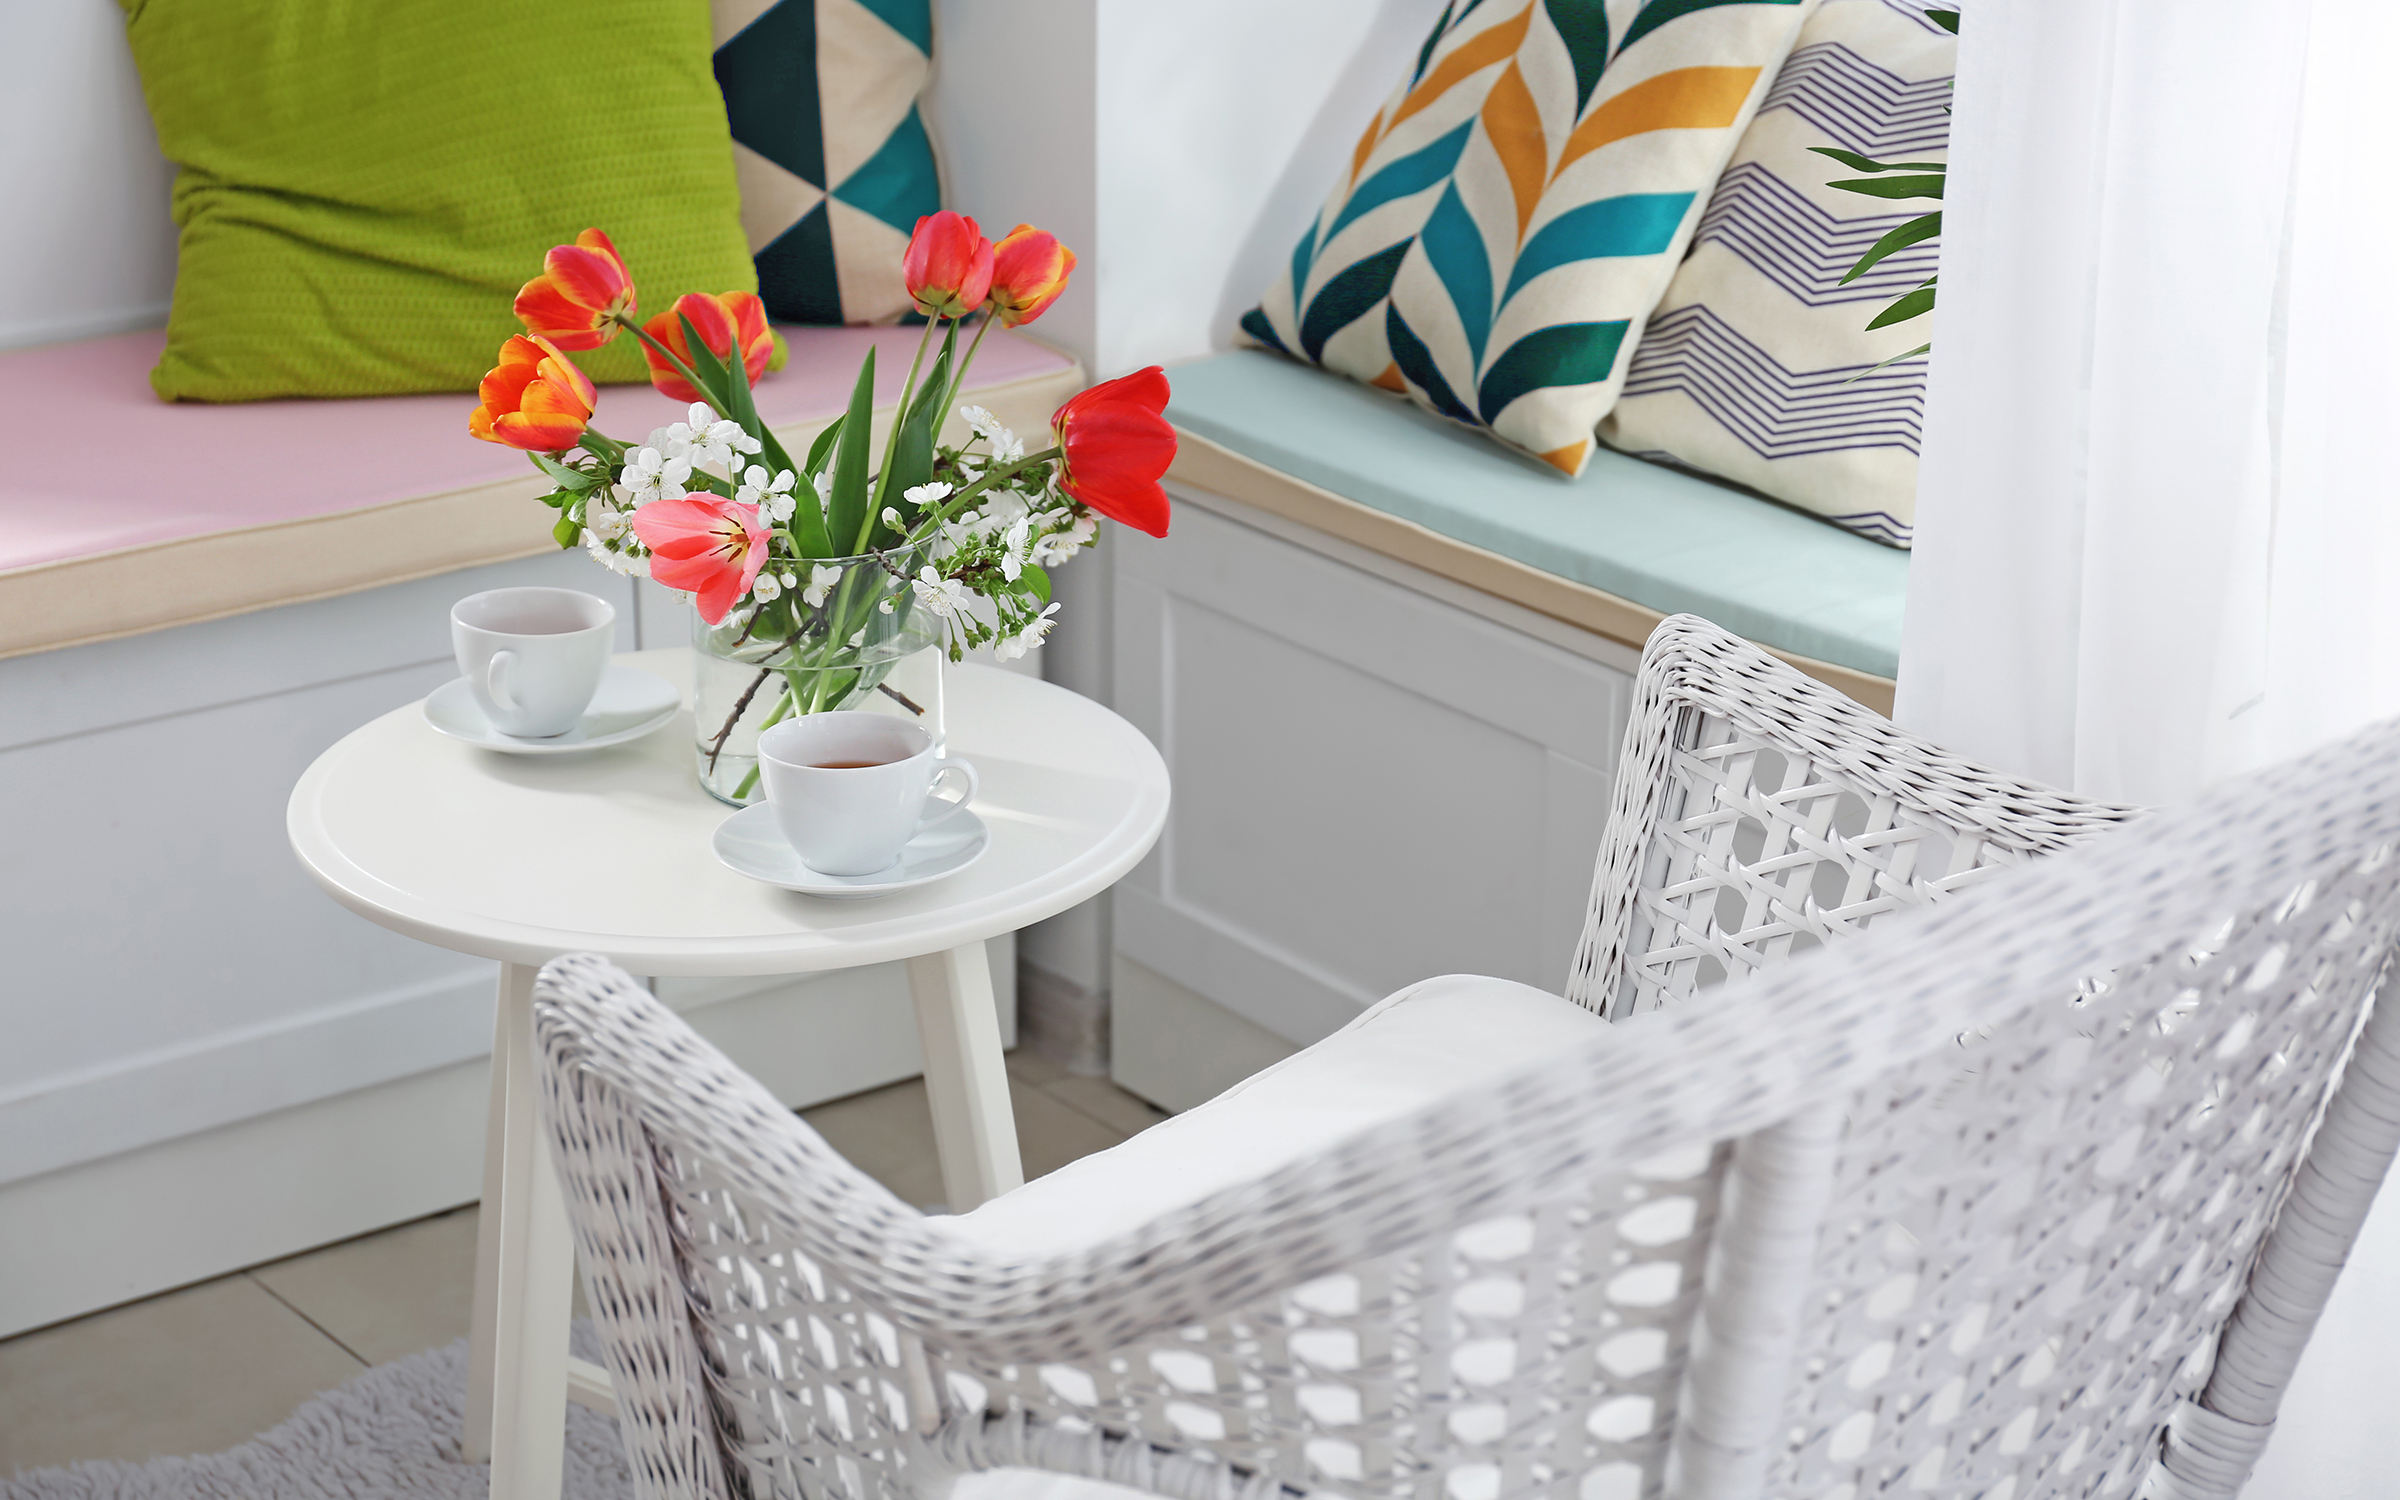 wicker porch chair, benches with colorful pillows, white table with colorful bouquet of tulips